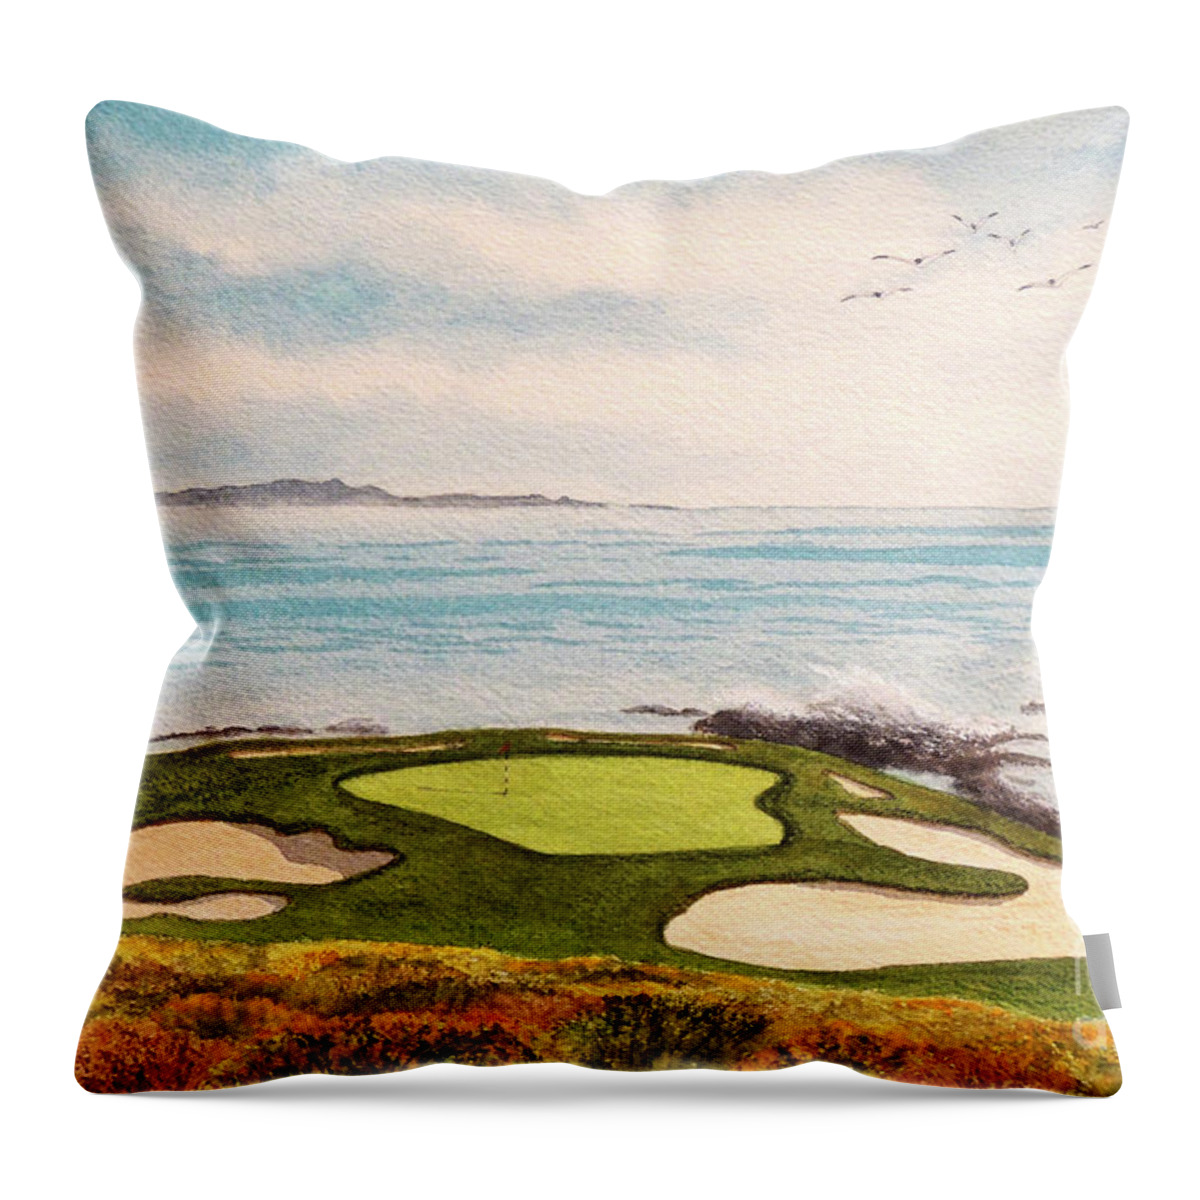 Golf Course Paintings Throw Pillow featuring the painting Pebble Beach Golf Course Signature Hole 7 by Bill Holkham